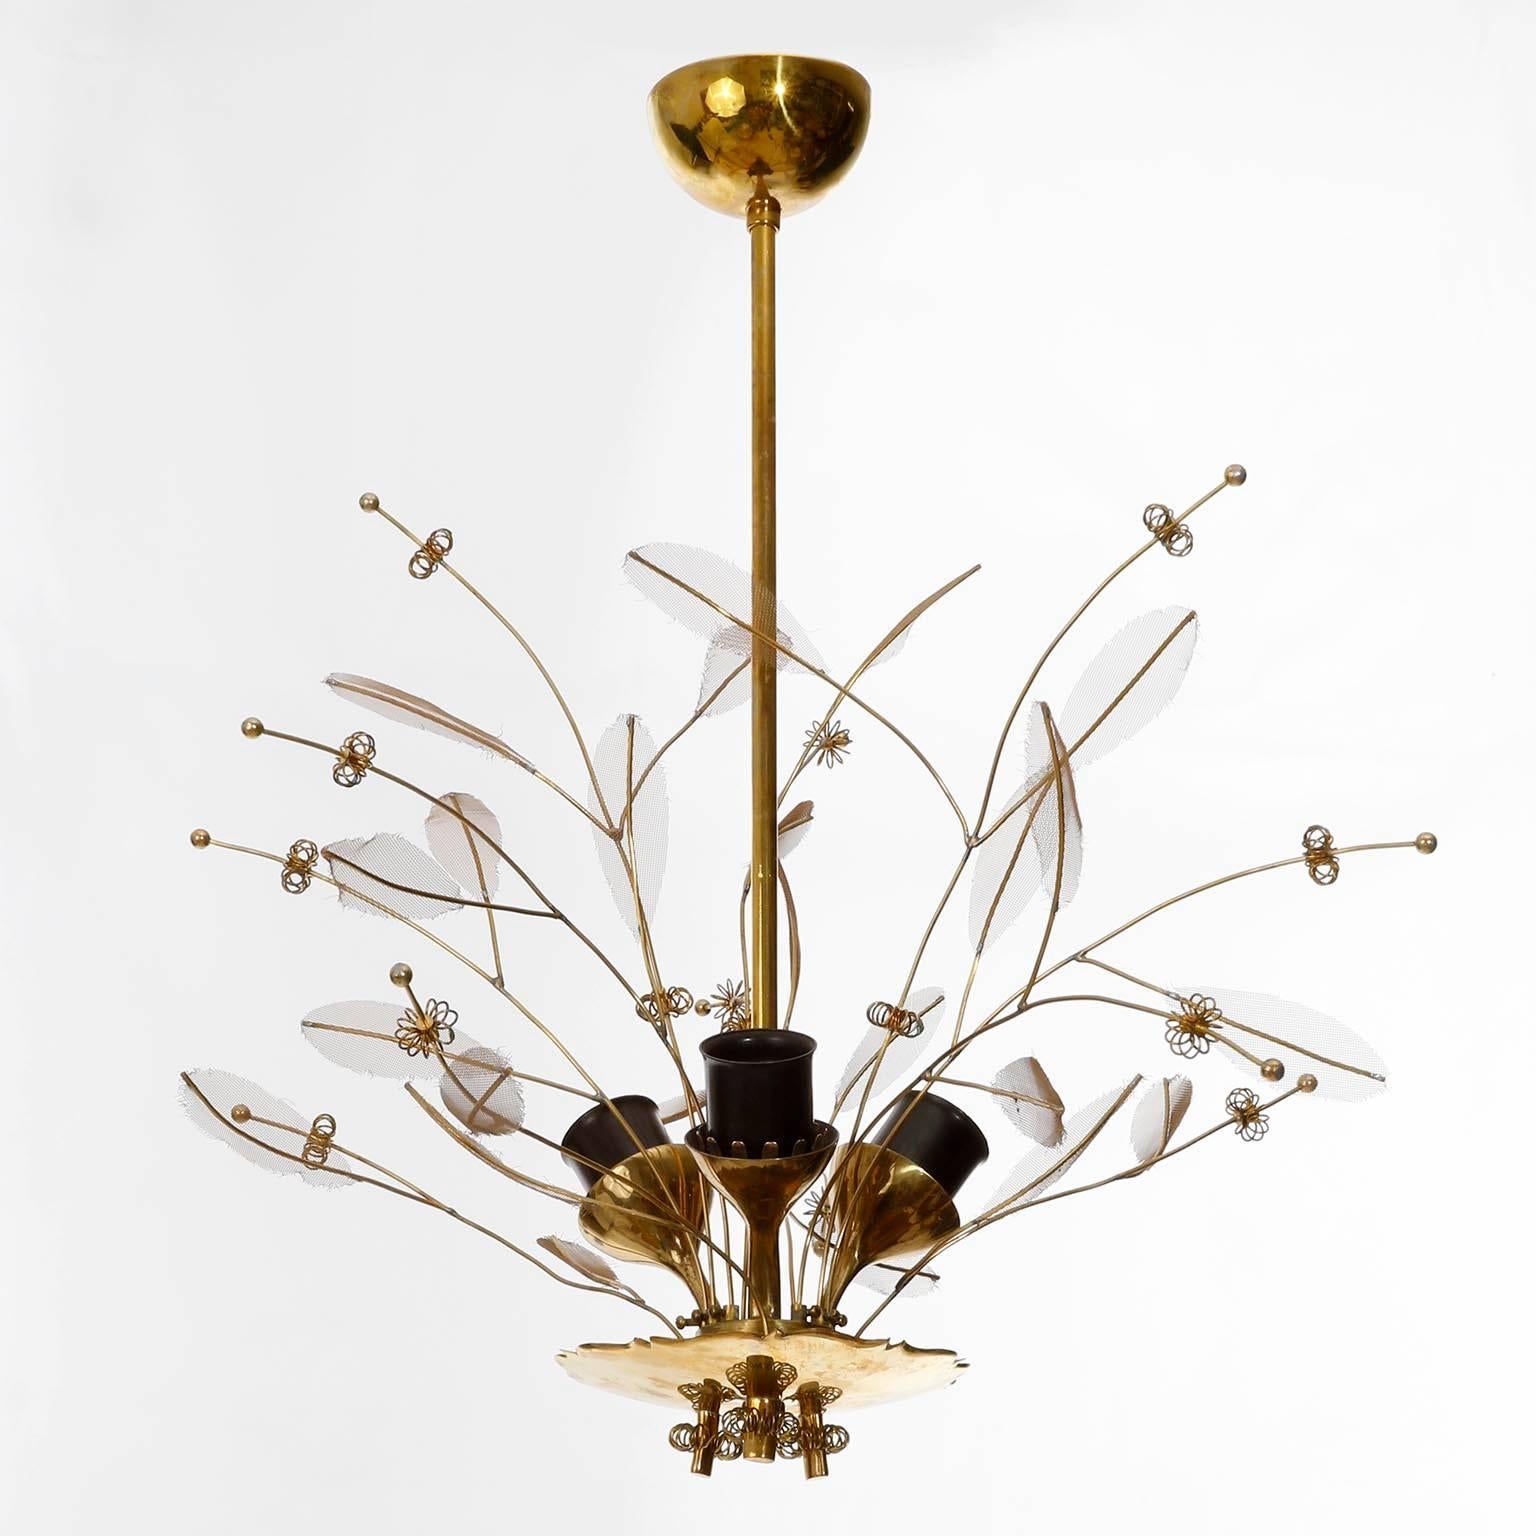 Finnish Paavo Tynell Chandelier 9029/3 'Bridal Bouquet' for Taito Oy, Brass Glass, 1950